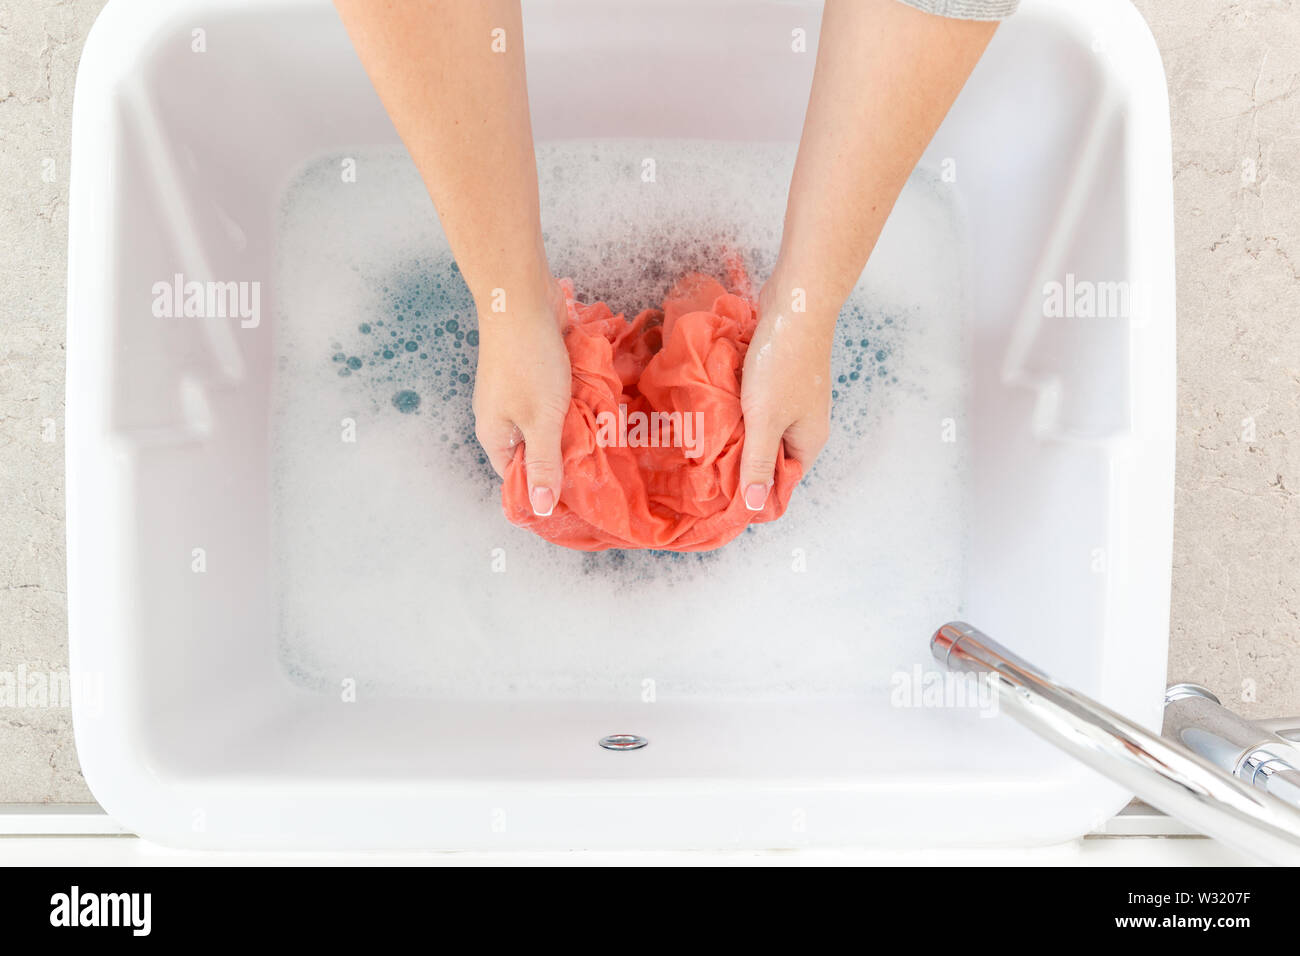 Female Hands Washing Clothes In Sink In Laundry Room Stock